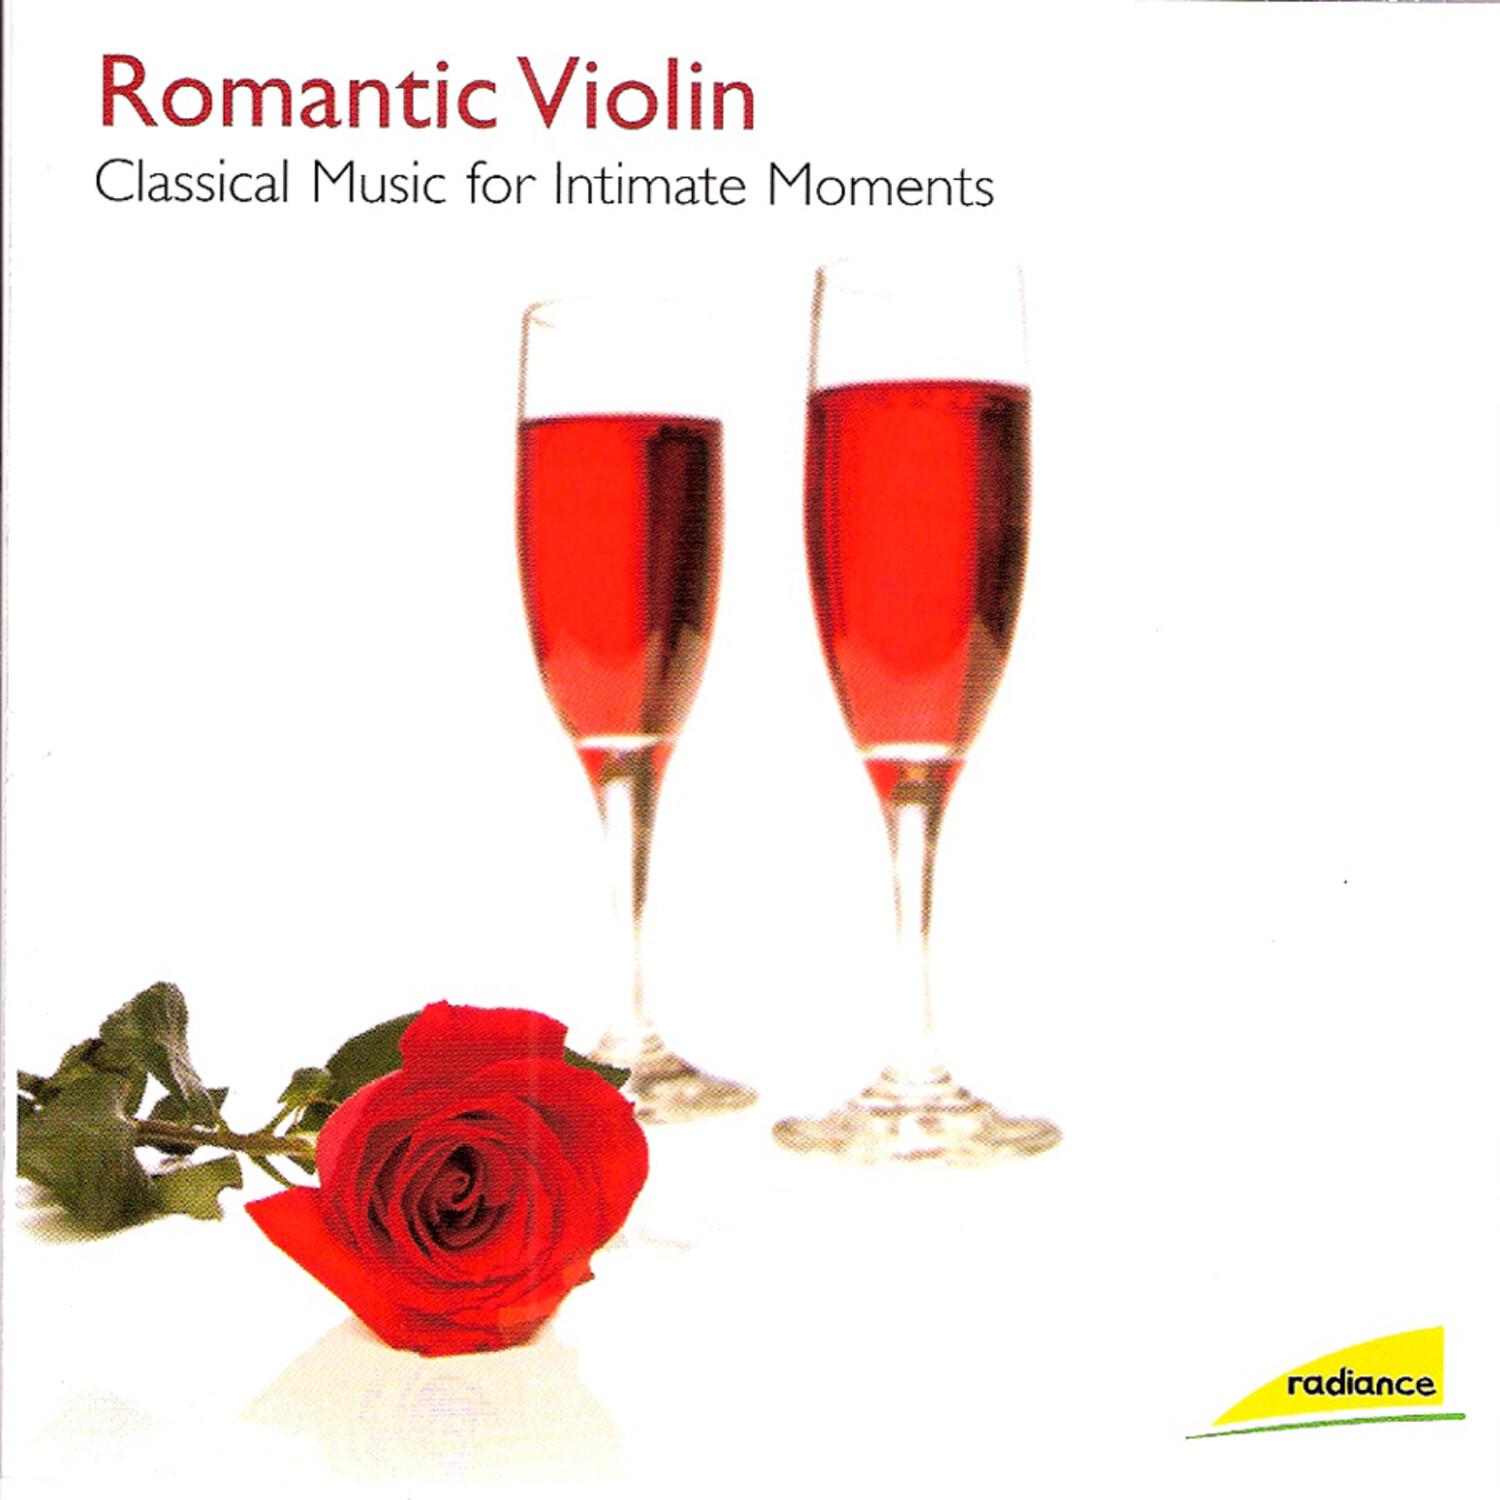 Romantic Violin - Classical Music for Intimate Moments